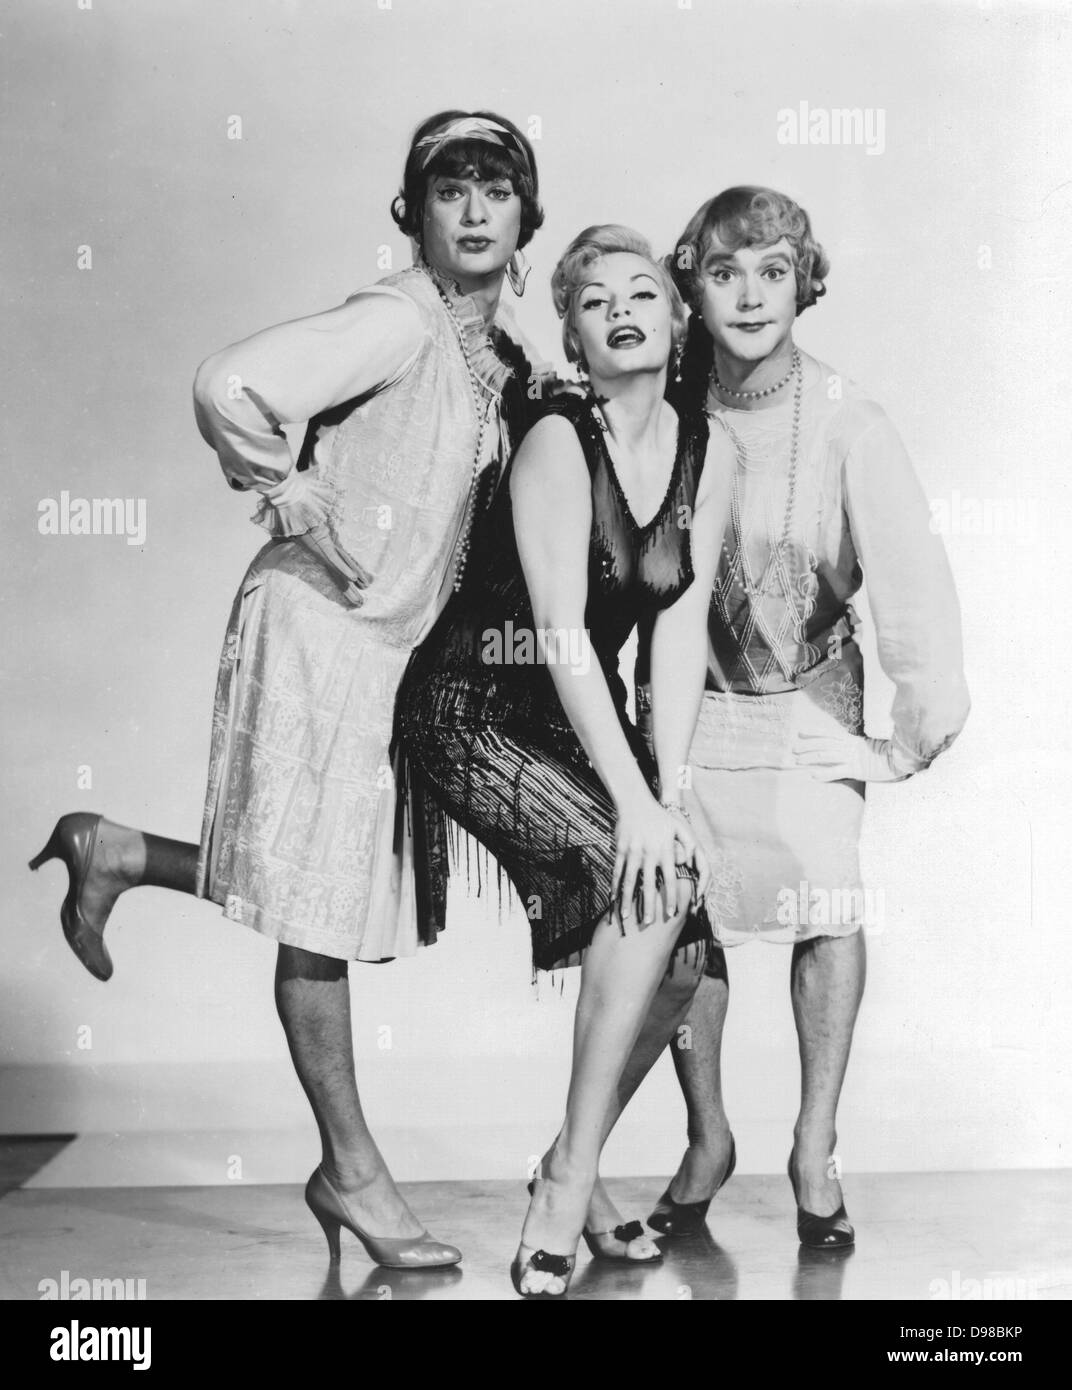 Publicity still for the Hollywood film 'Some Like It Hot' (1959): Director and Producer, Billy Wilder. Marily Monroe with her co-stars Tony Curtis and Jack Lemmon in drag. Stock Photo